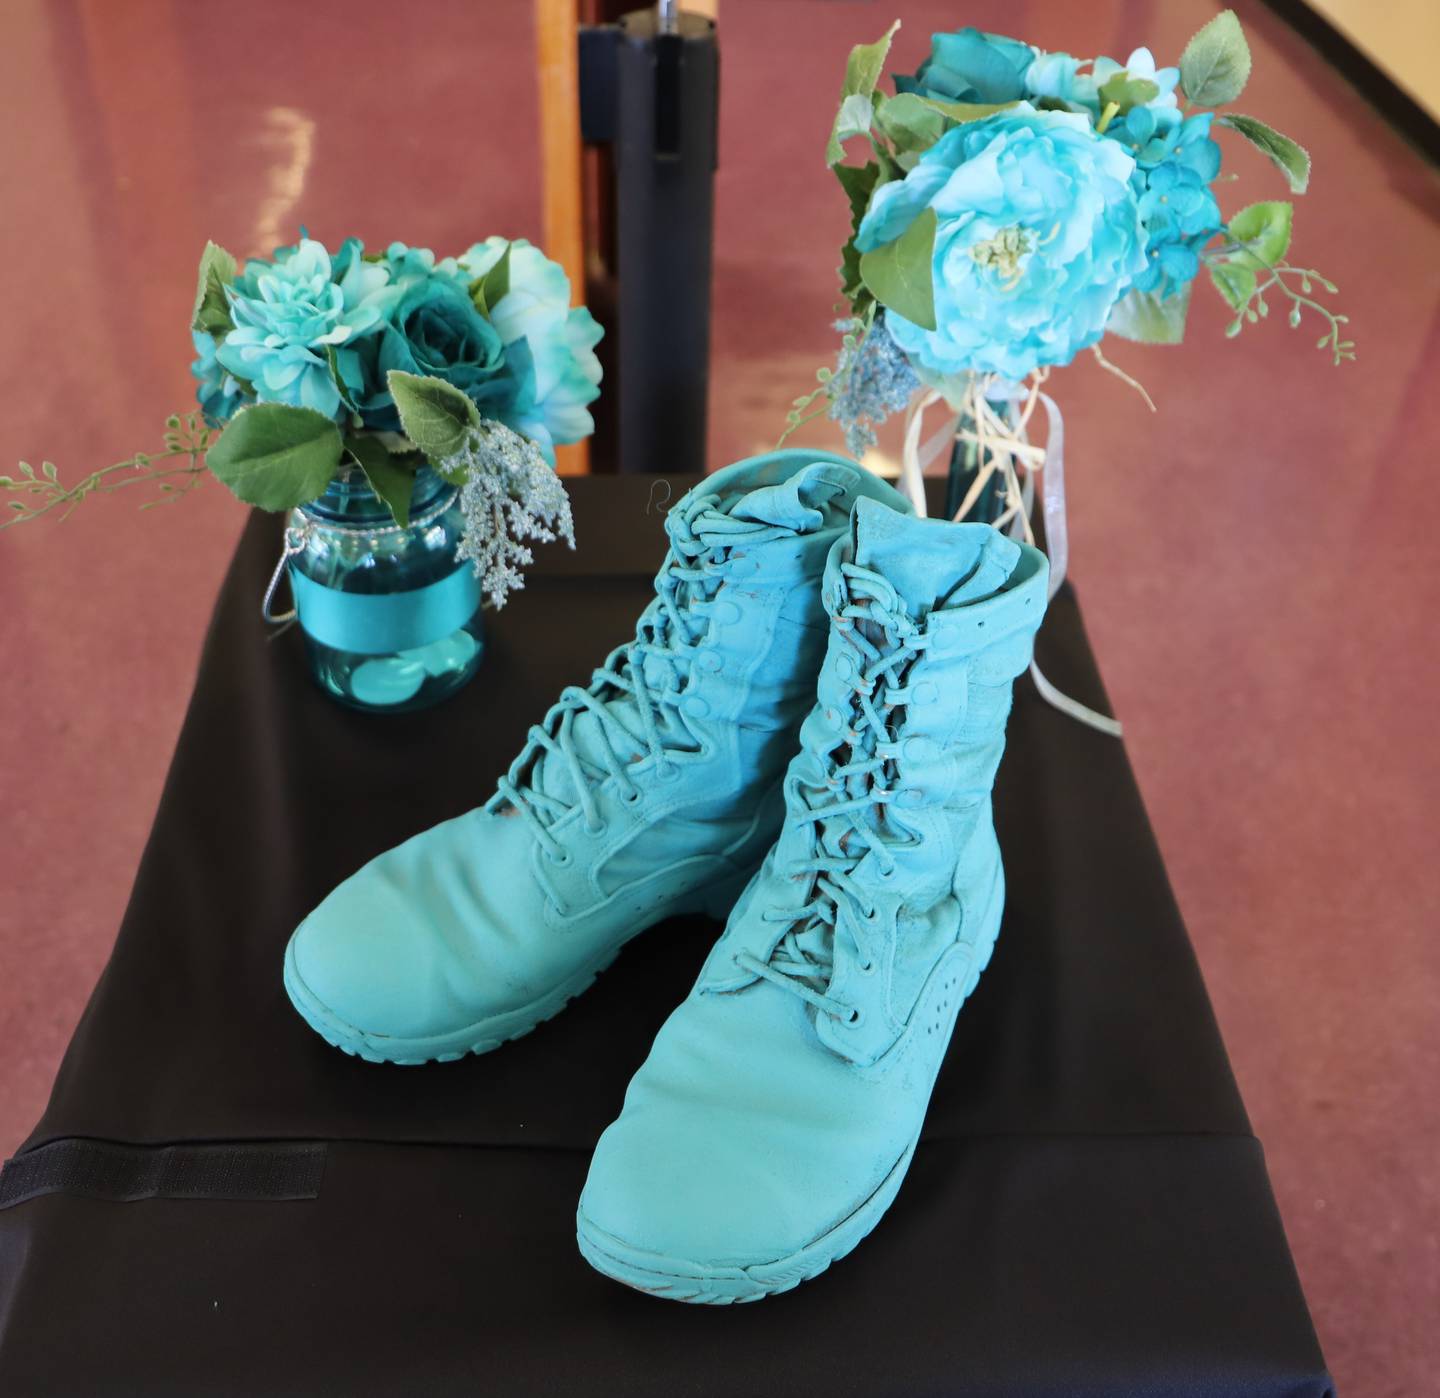 Teal shoes on display at McMahon Auditorium April 22, 2021, for the Sexual Assault Awareness Prevention Month book club. The shoes were painted teal and displayed to bring awareness to SAAPM.